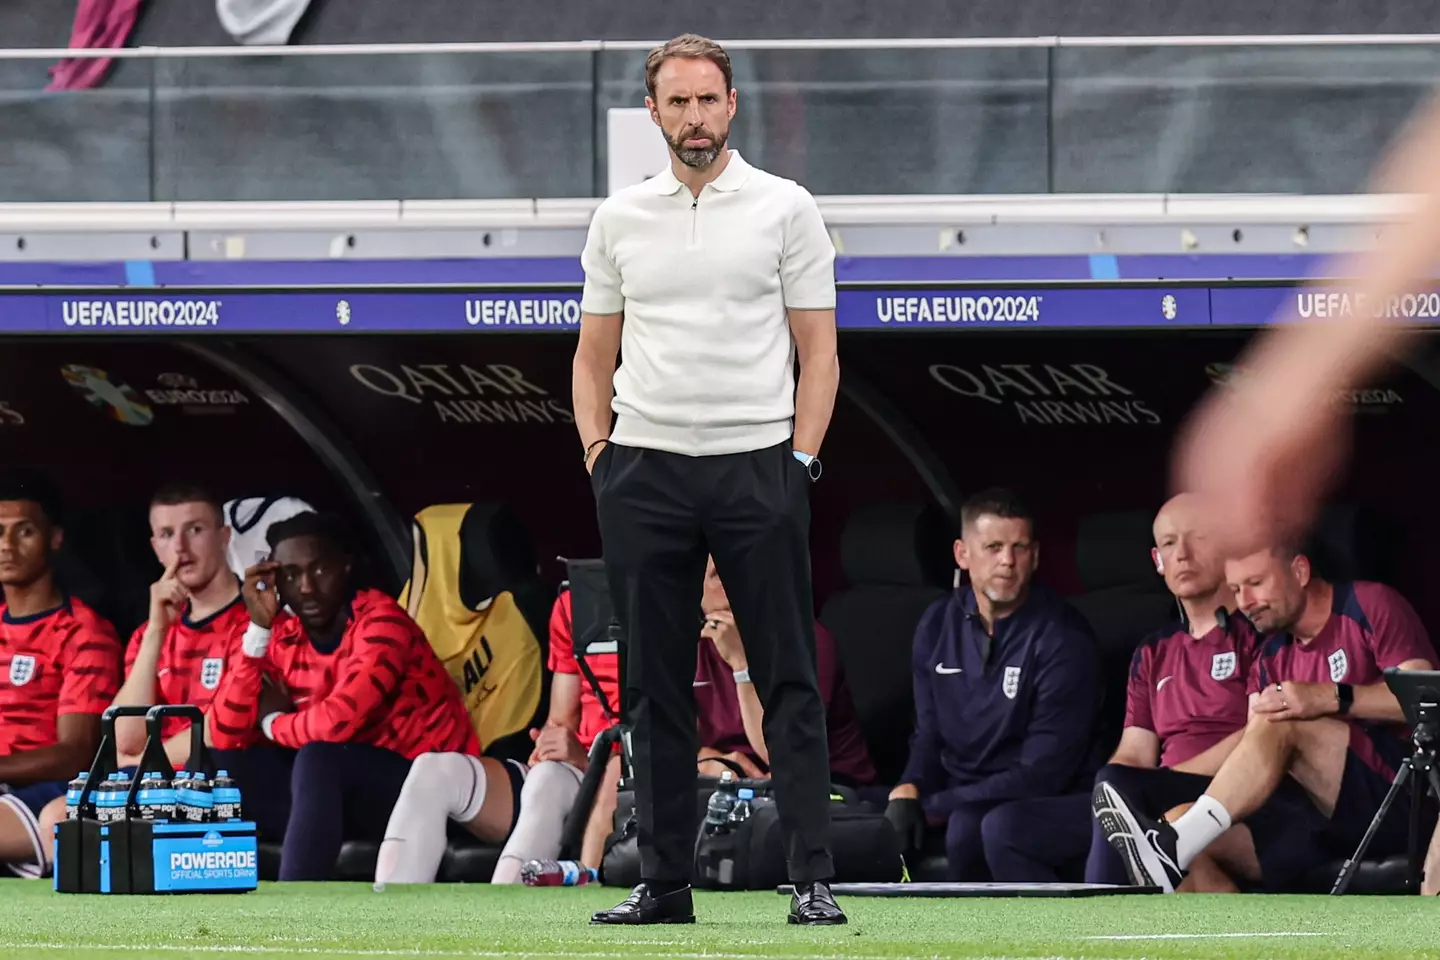 Gareth Southgate in the dugout during Denmark vs. England. Image: Getty